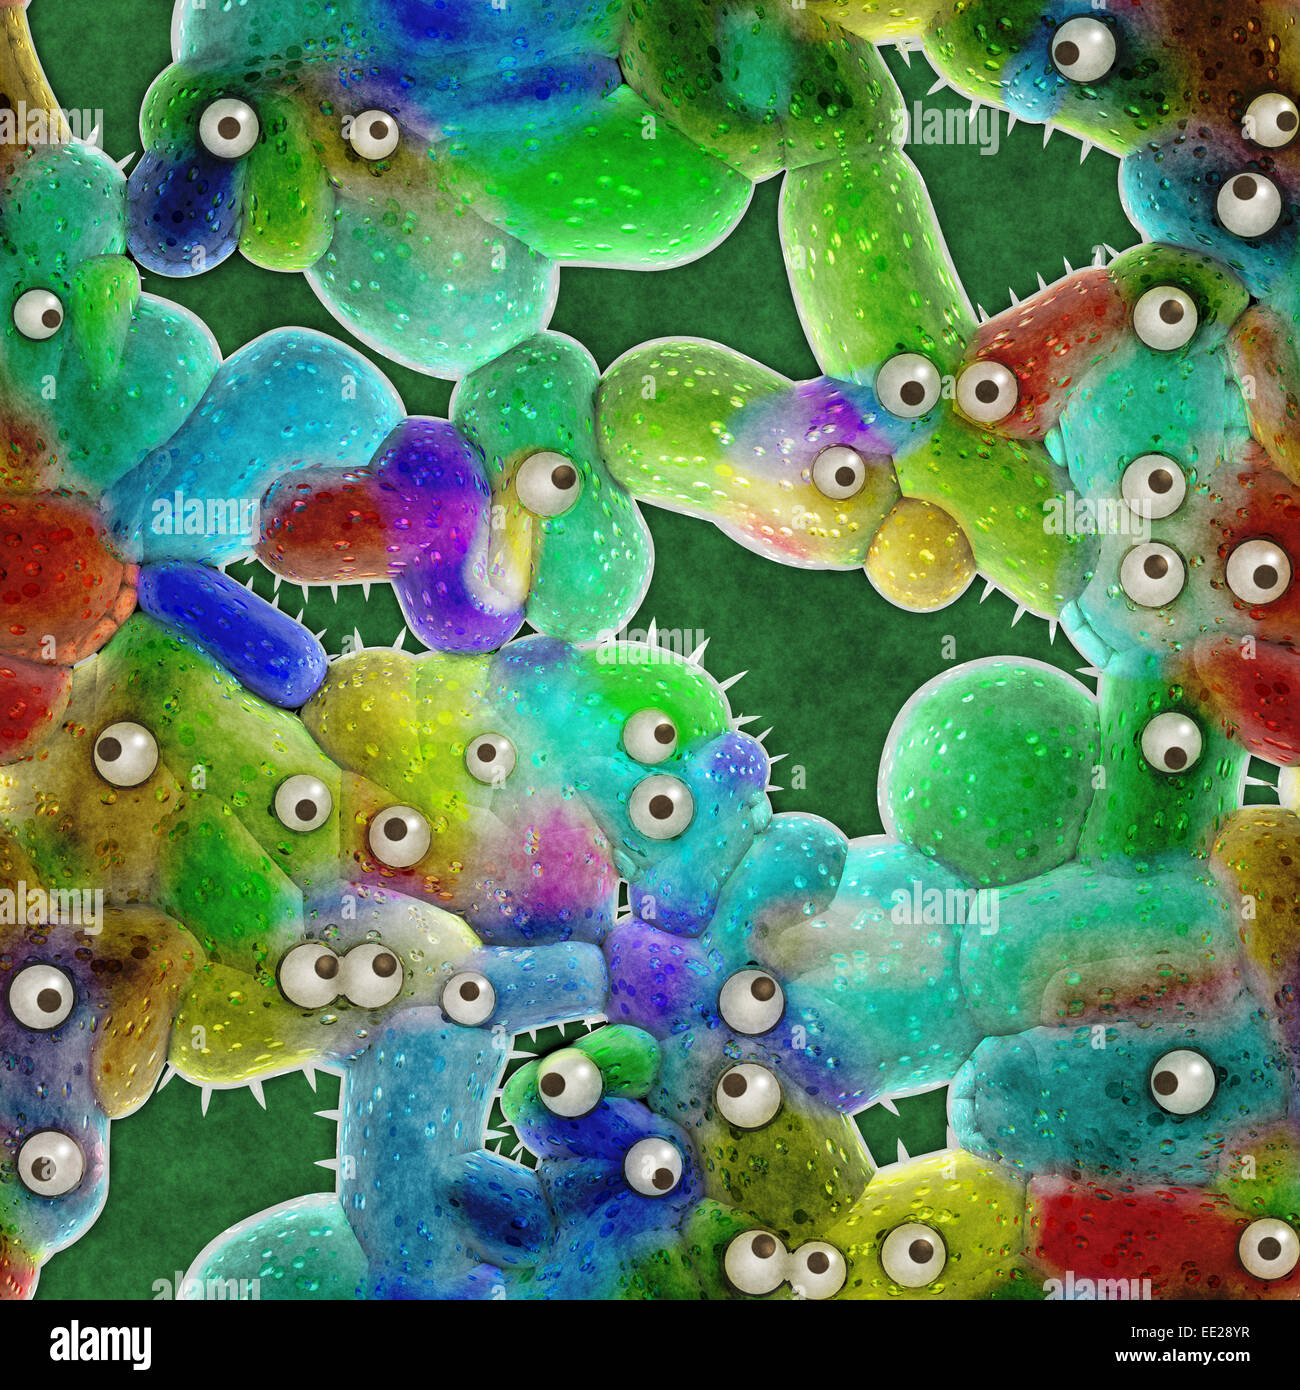 Culture of green colored germs under high magnification Stock Photo